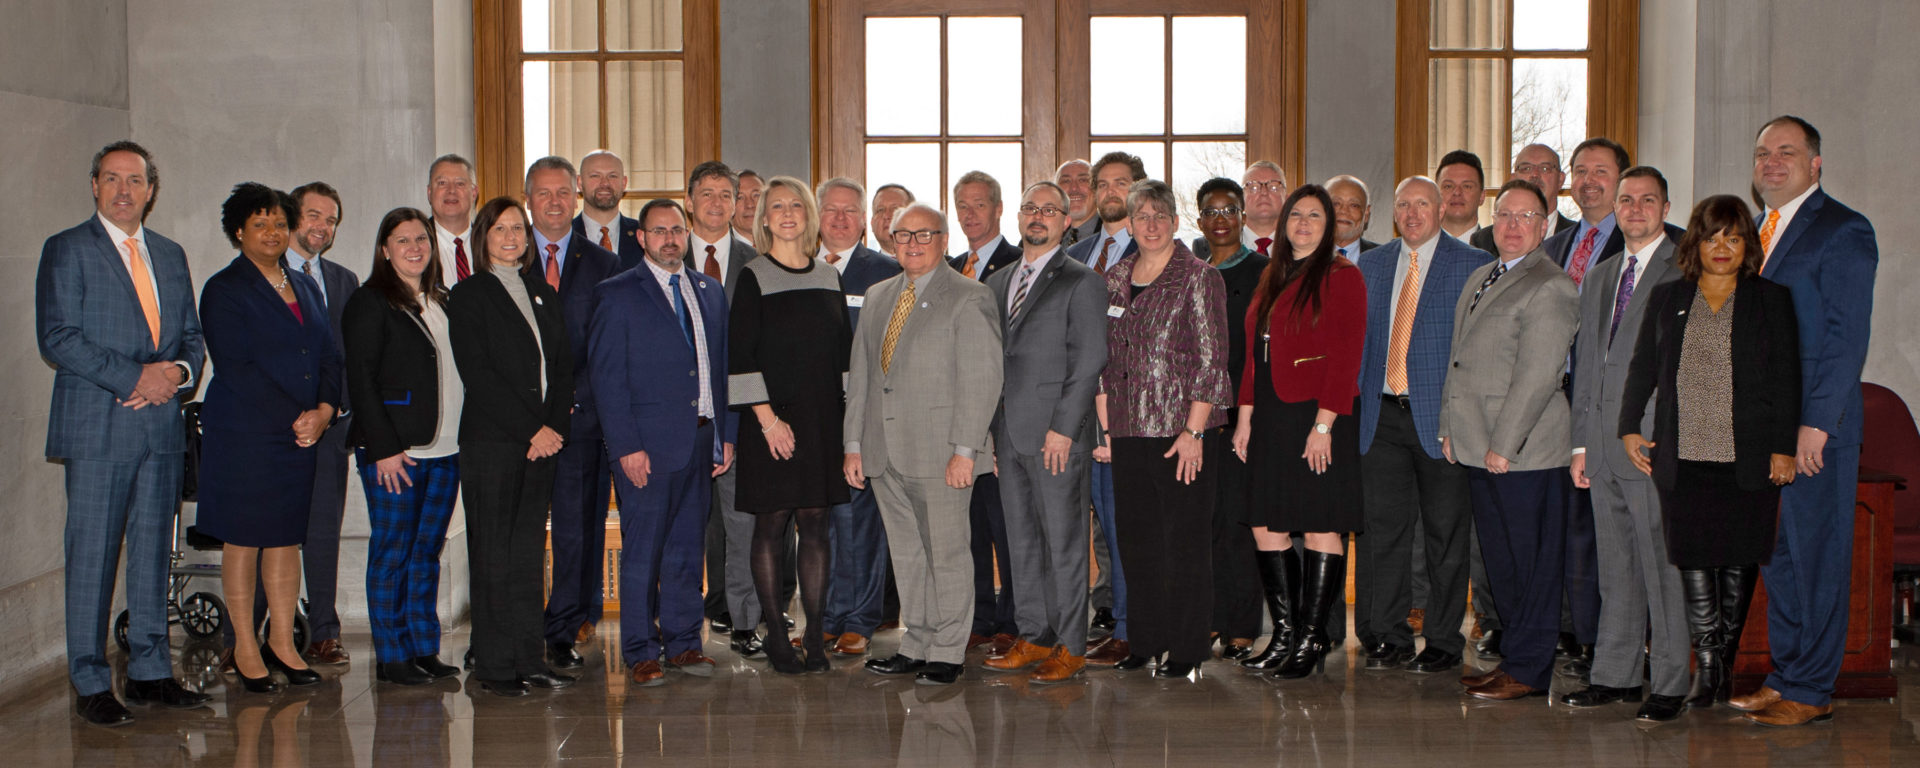 IPS leaders gather with graduates of the Tennessee Certified Public Manager program.